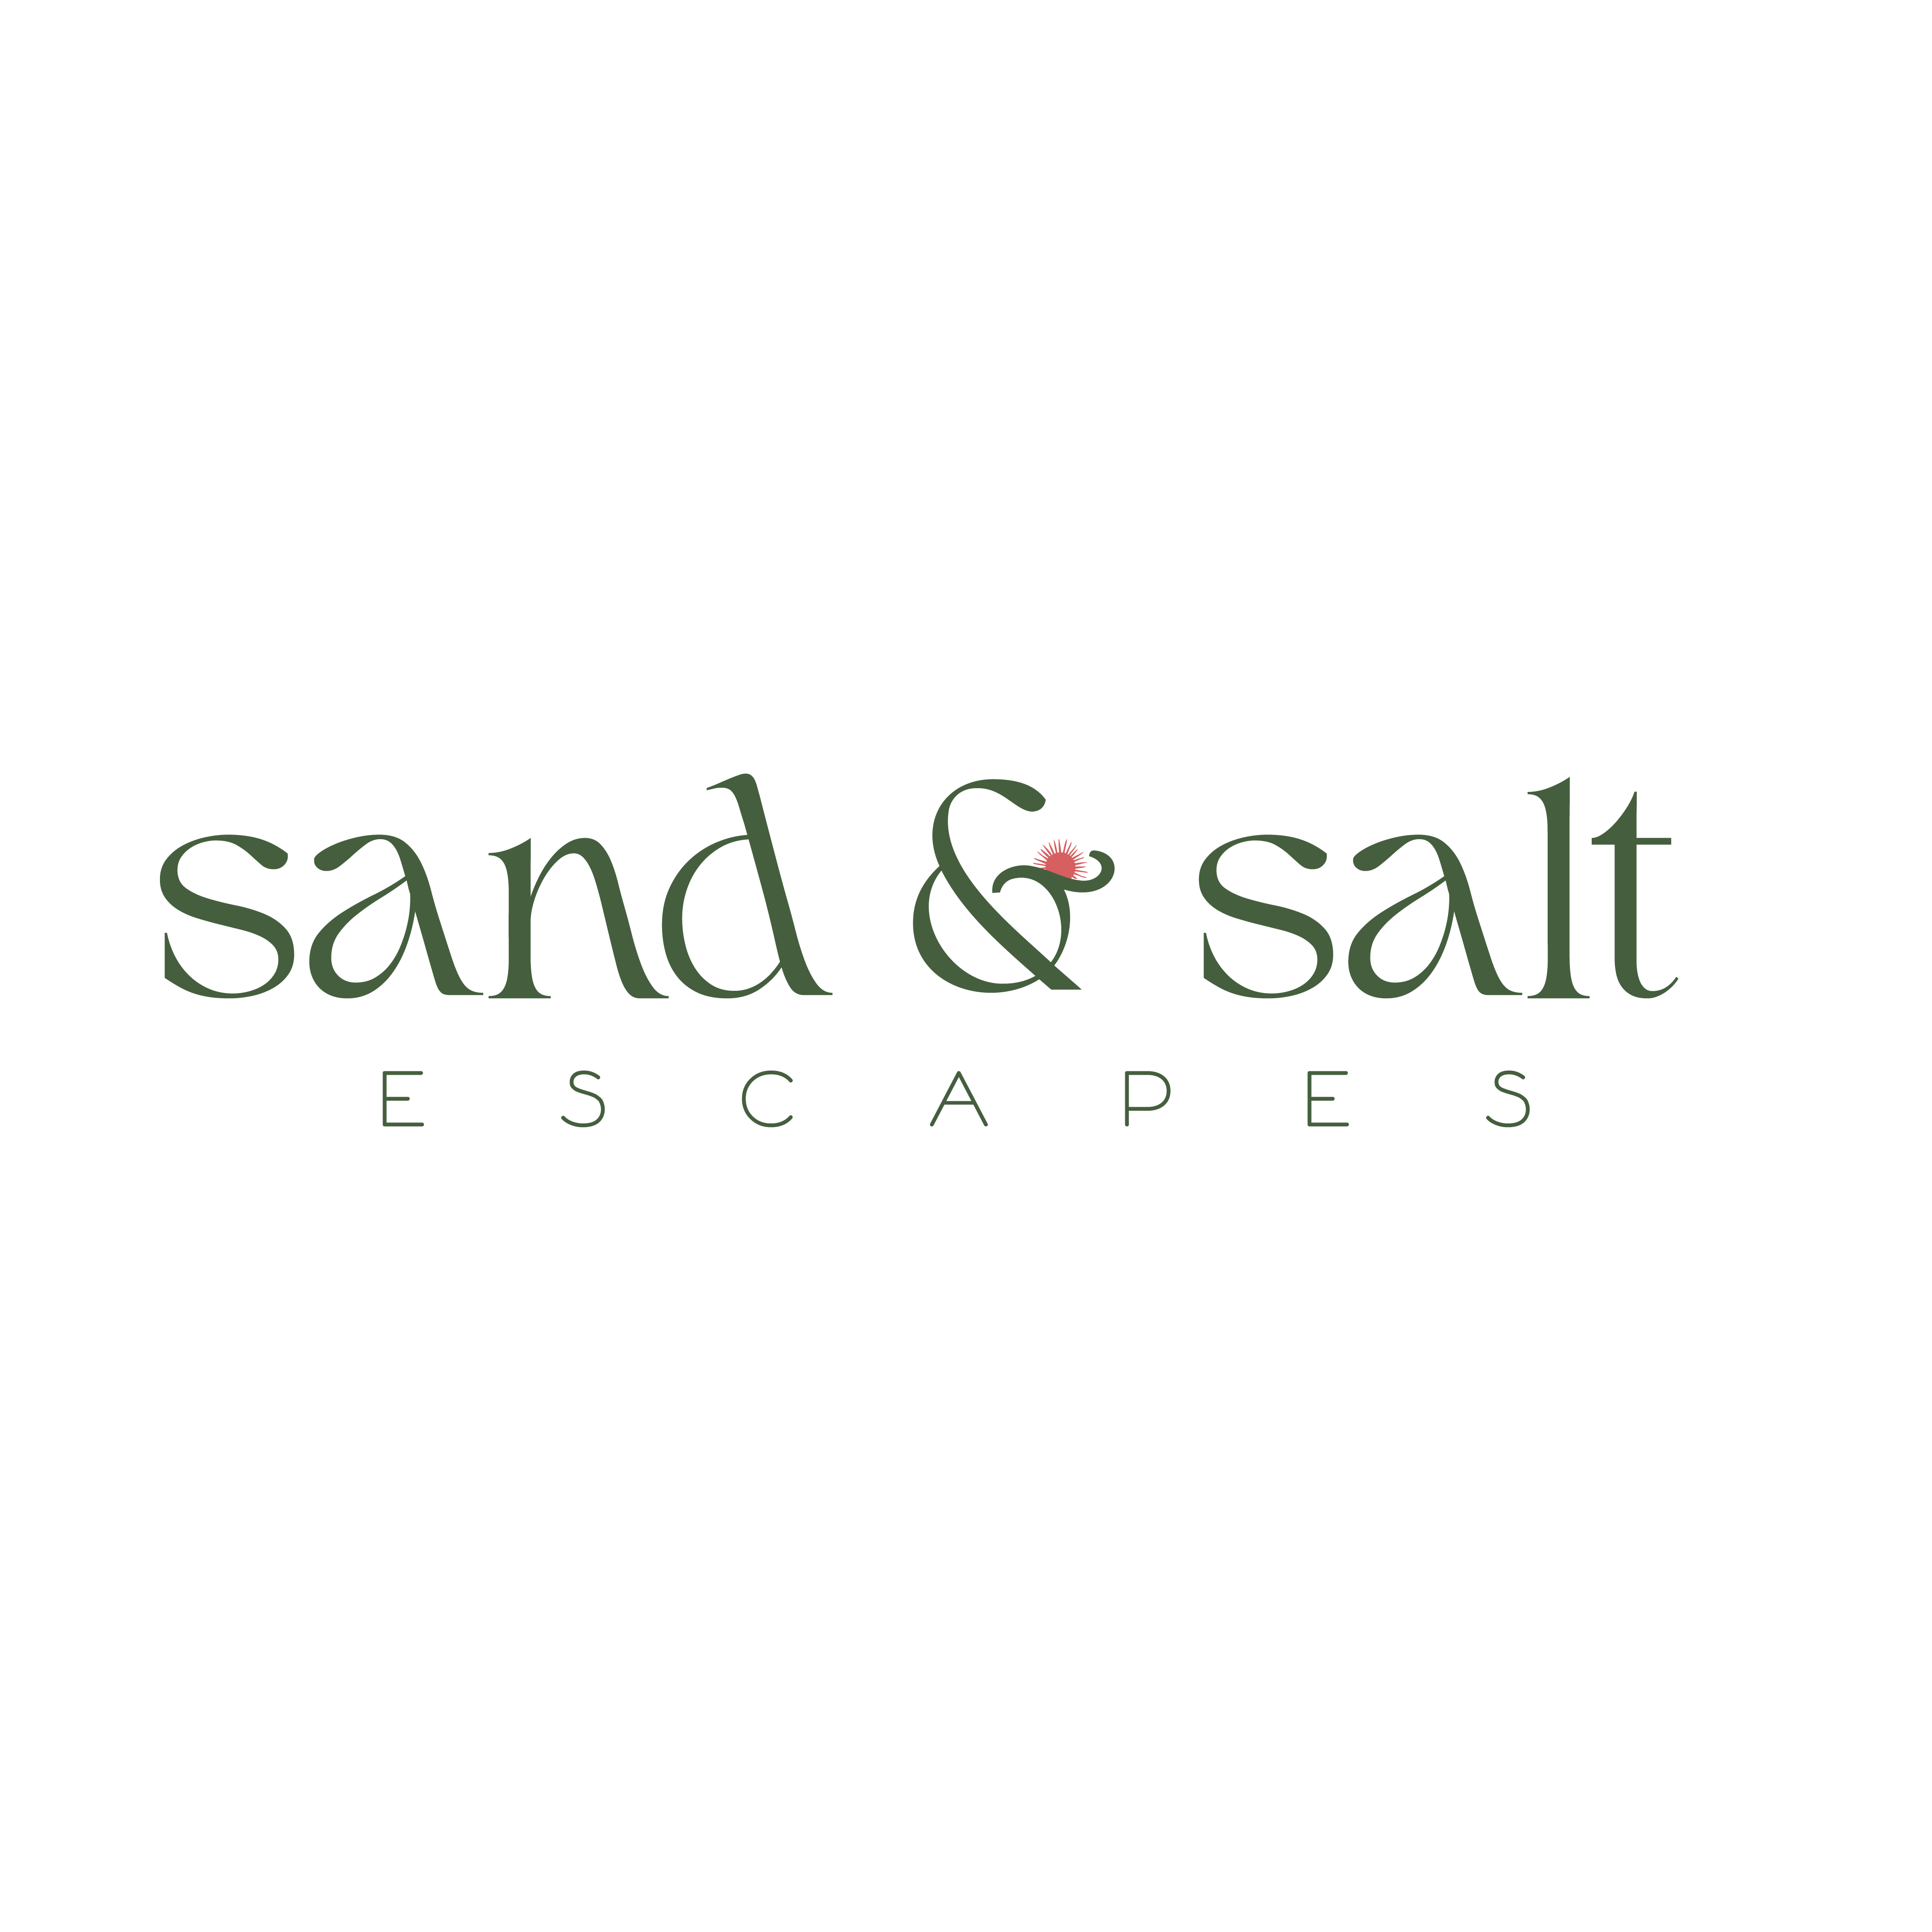 Sand and Salt Escapes launches retreats for burnt-out professionals